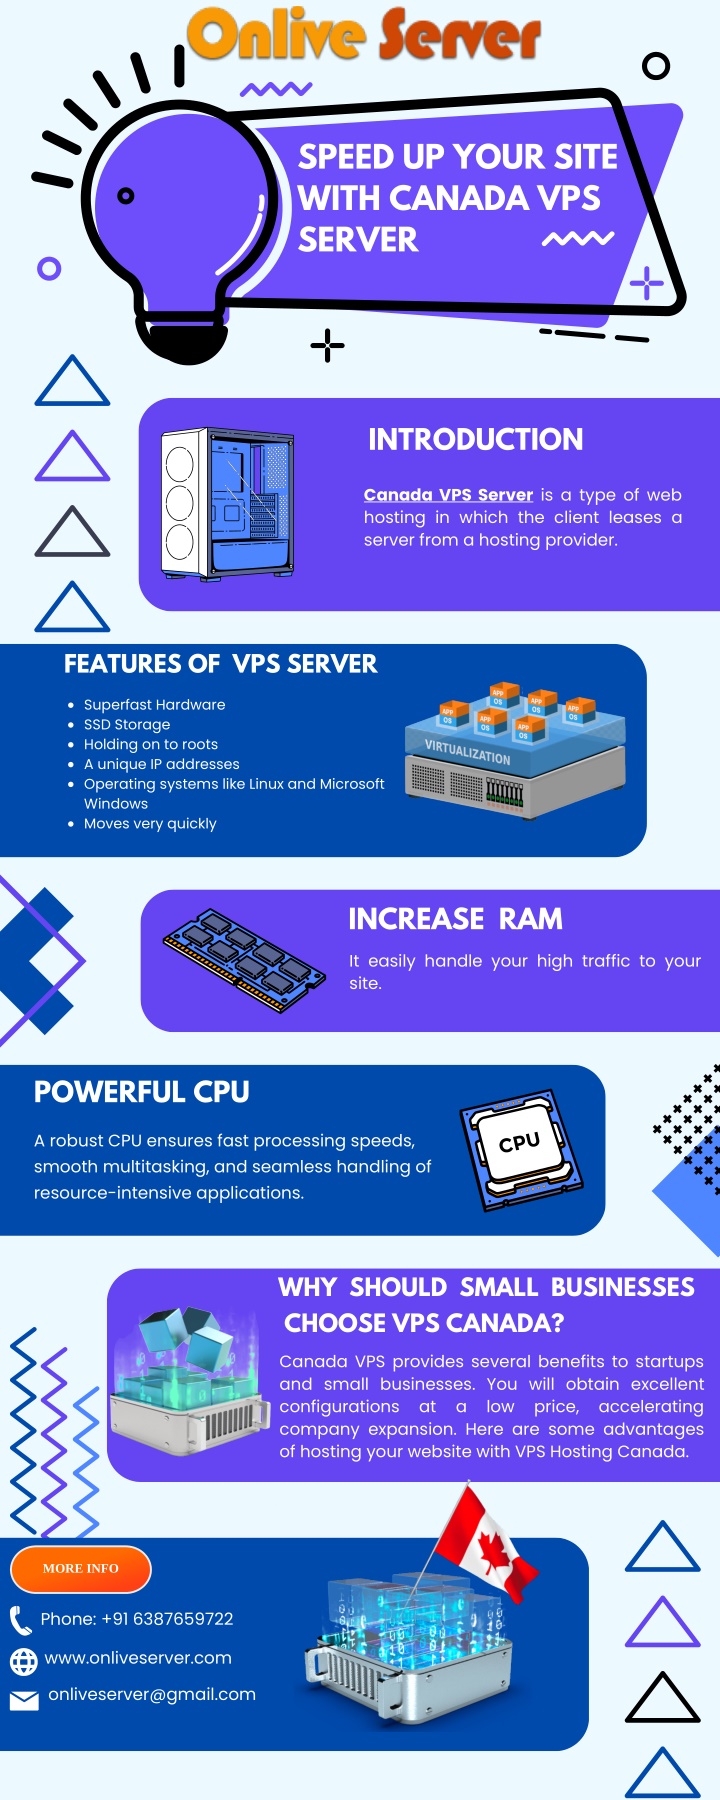 speed up your site with canada vps server